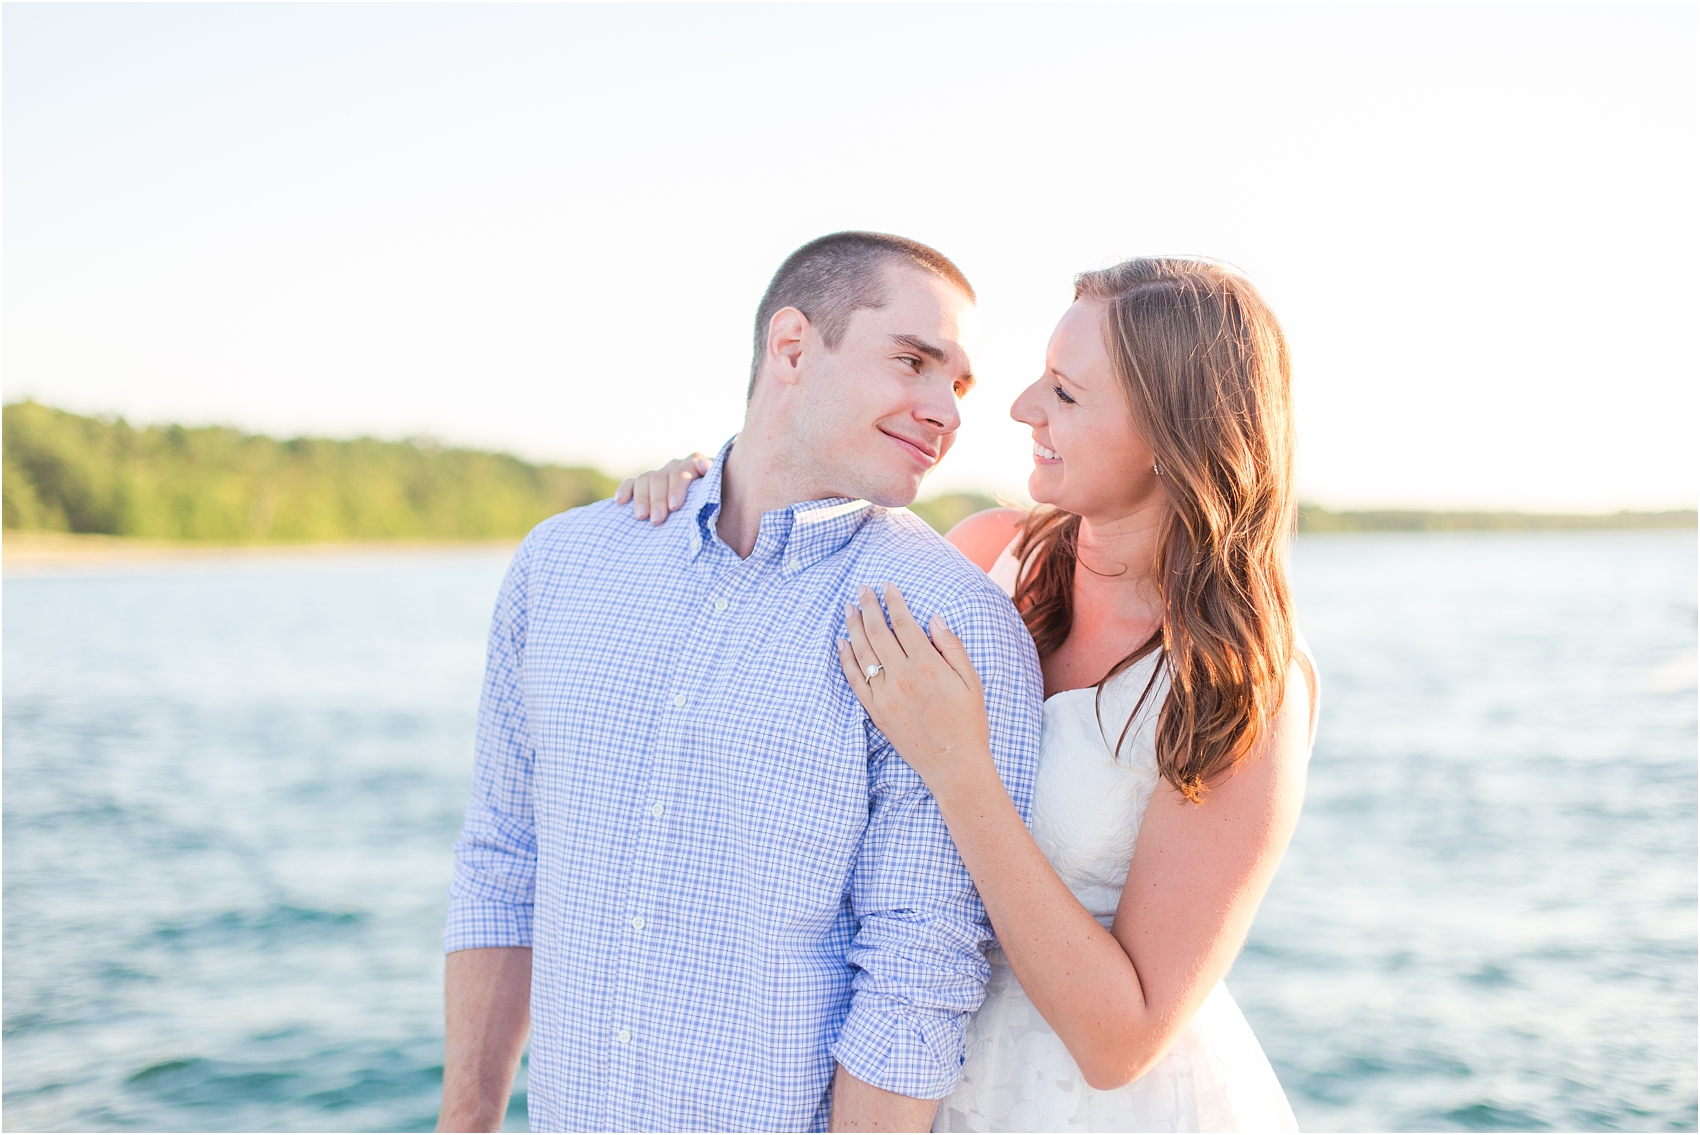 romantic-sunset-engagement-photos-at-the-lighthouse-in-charlevoix-mi-by-courtney-carolyn-photography_0014.jpg